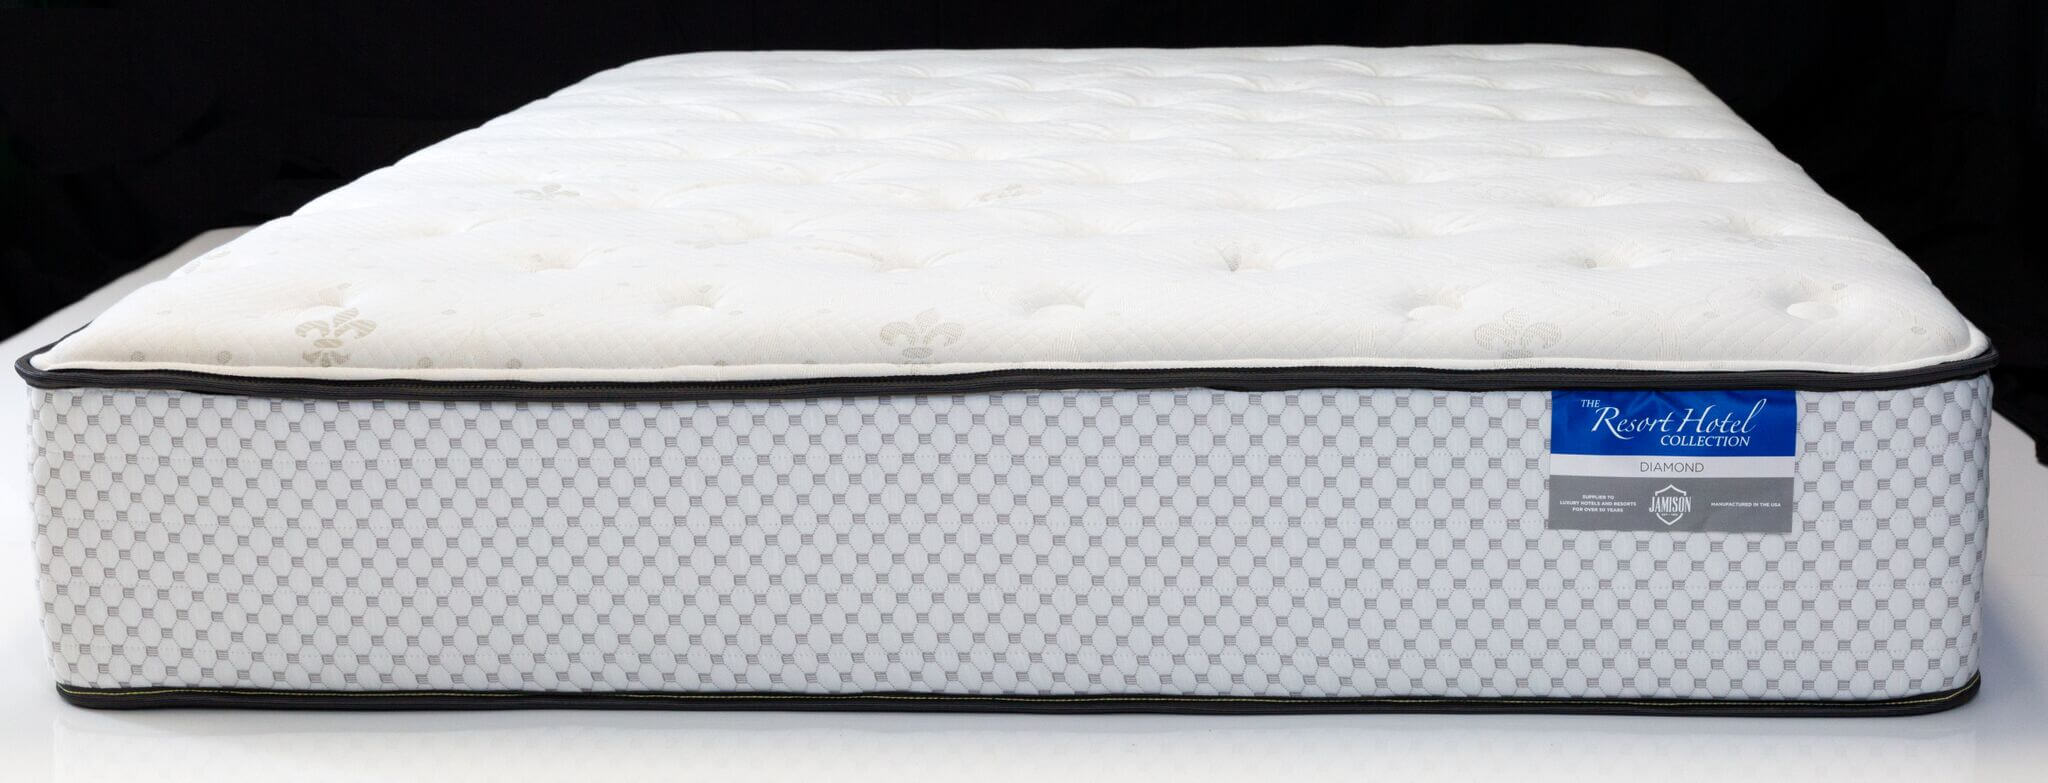 hotel collection mattress- king size